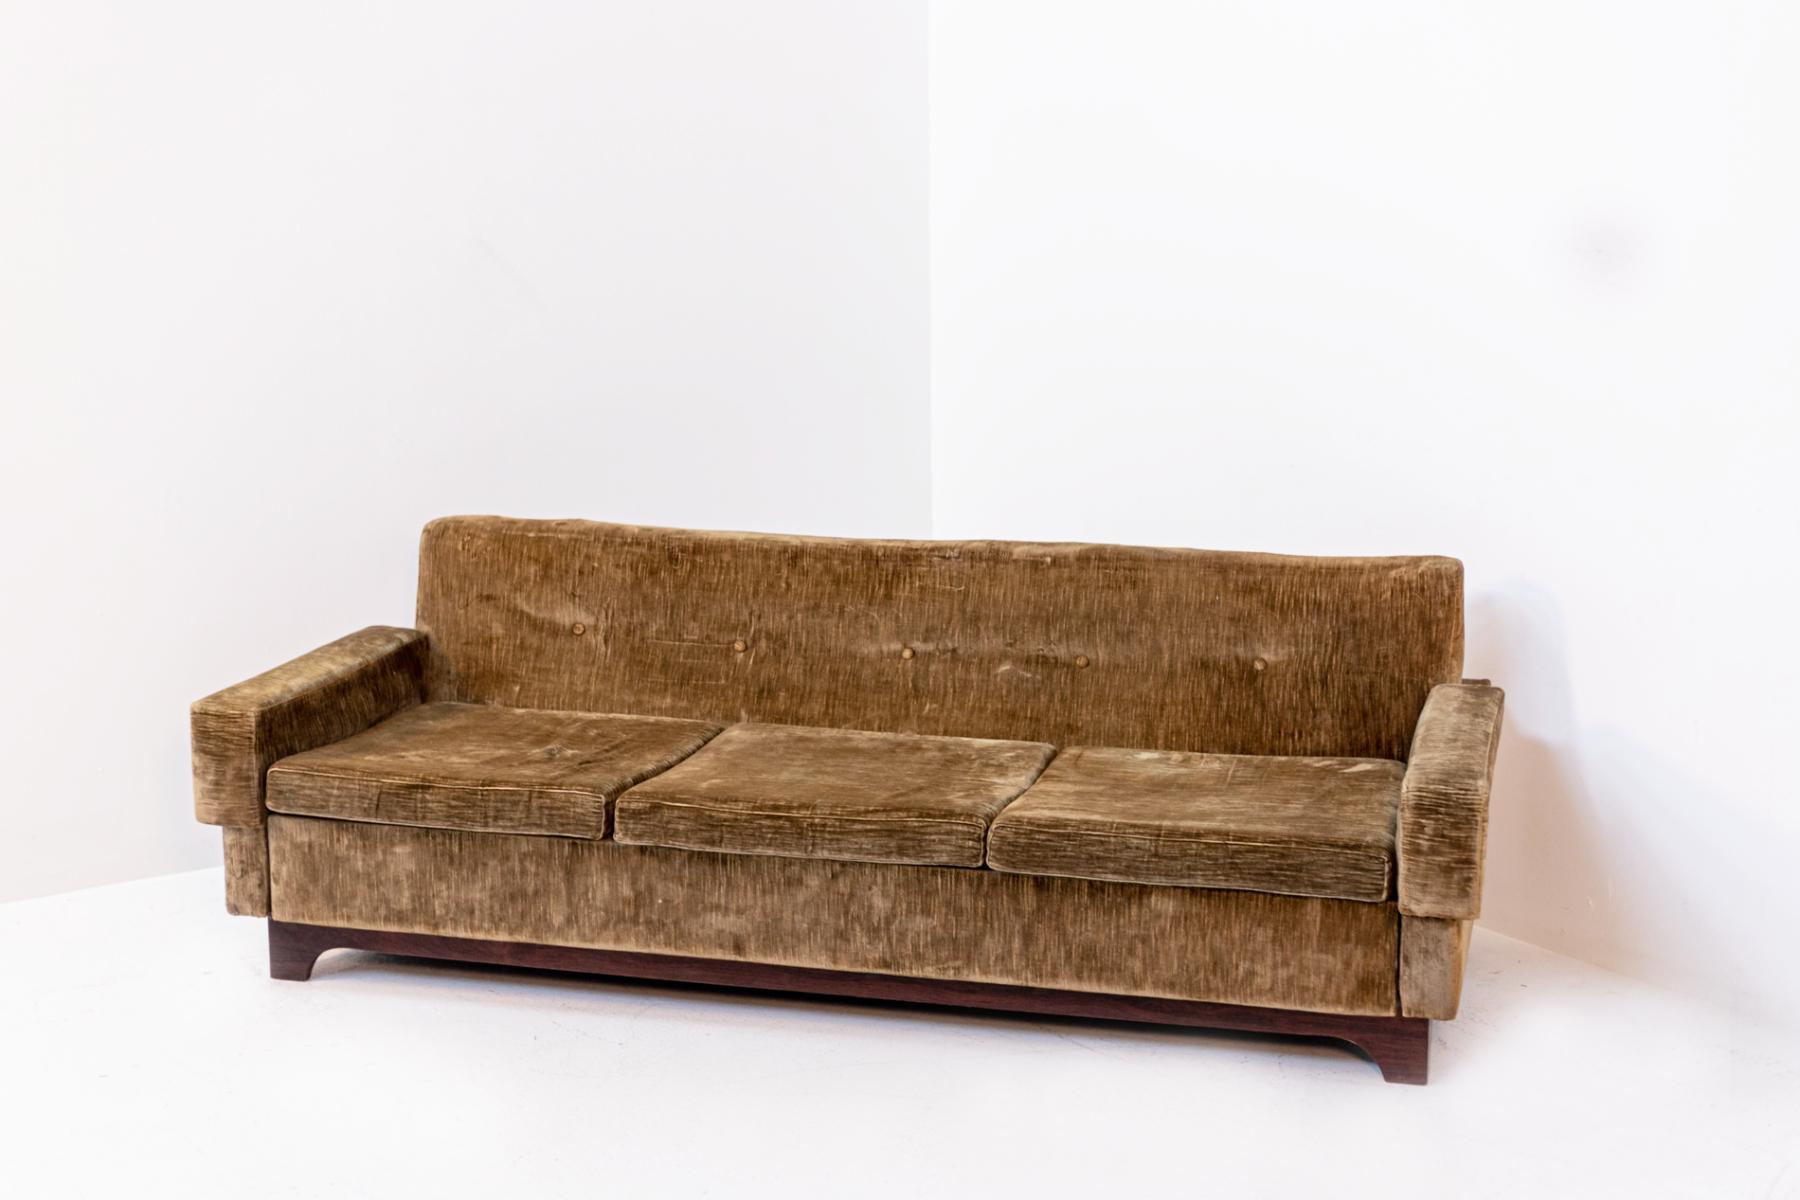 Beautiful velvet sofa manufactured by Saporiti Italia in 1960.
The sofa is in original condition and has been upholstered in acid green-brown velvet. Its strong and durable structure is made of wood, and we notice it also in the base of the sofa.